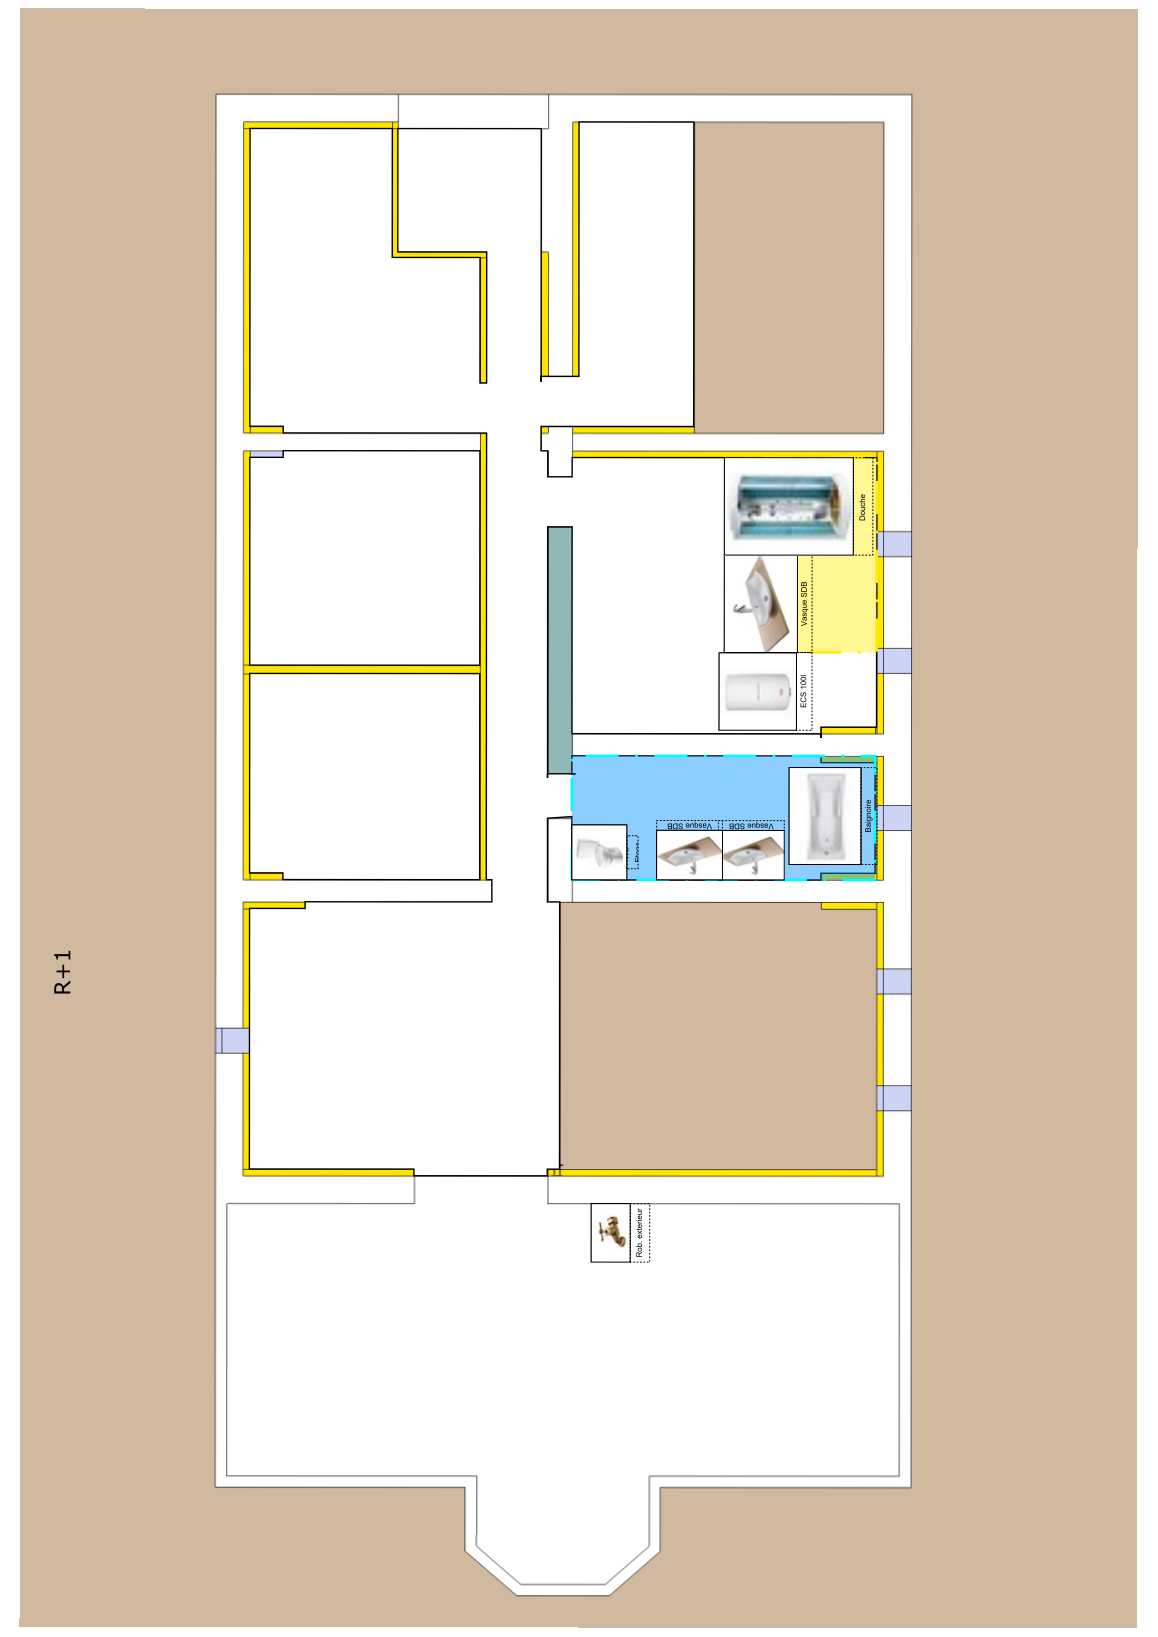 Plan plomberie 5.png, 205.96 kb, 1158 x 1637